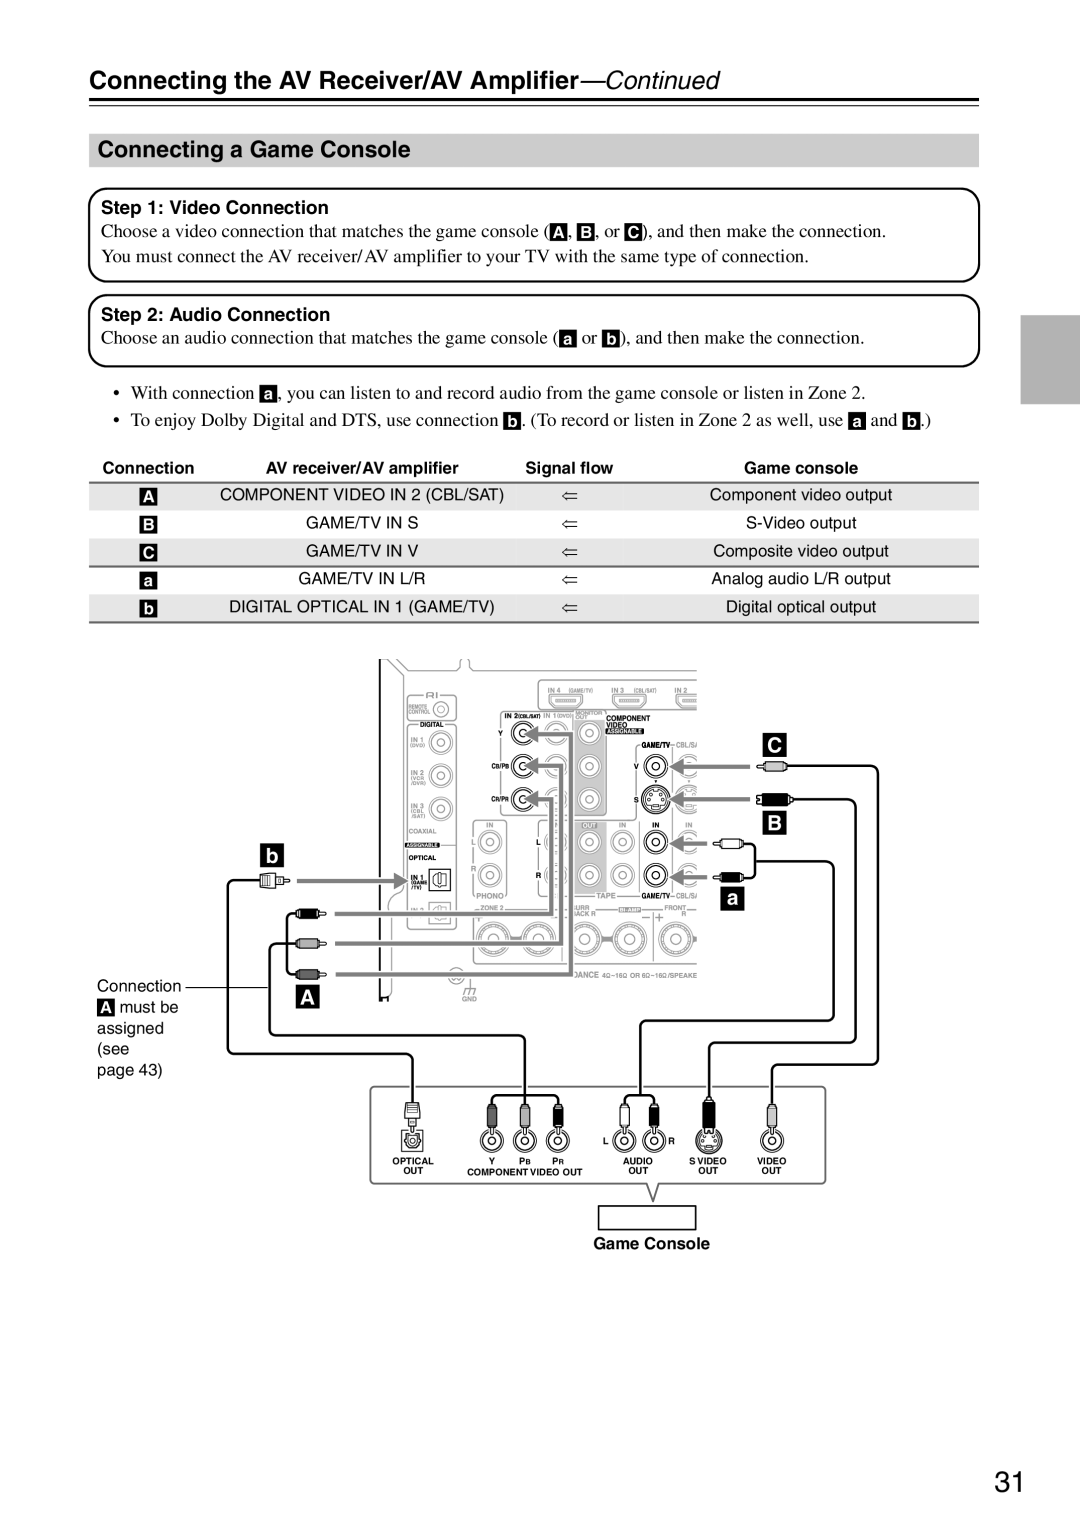 Onkyo TX-SA706 instruction manual Connecting a Game Console, C B b, Connecting the AV Receiver/AV Amplifier—Continued 